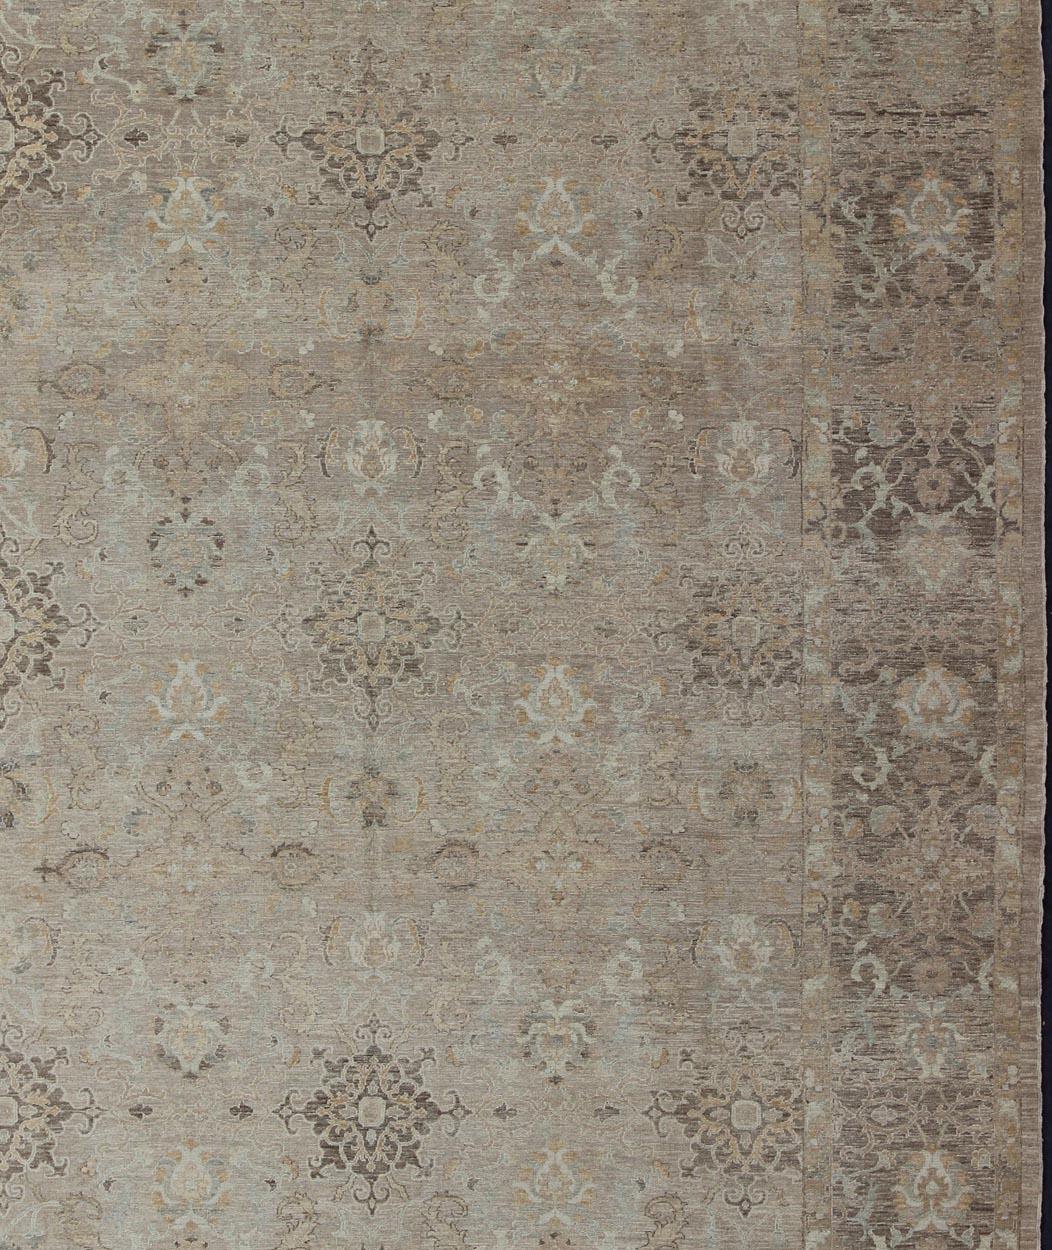 Turkish Sivas fine weave rug in taupe, gray, ivory and brown, cream and pastel colors, rug AN-108837, country of origin / type: Turkey / Sivas, circa 1980.

This Turkish Sivas rug is remarkably elegant in both color and design. The central field